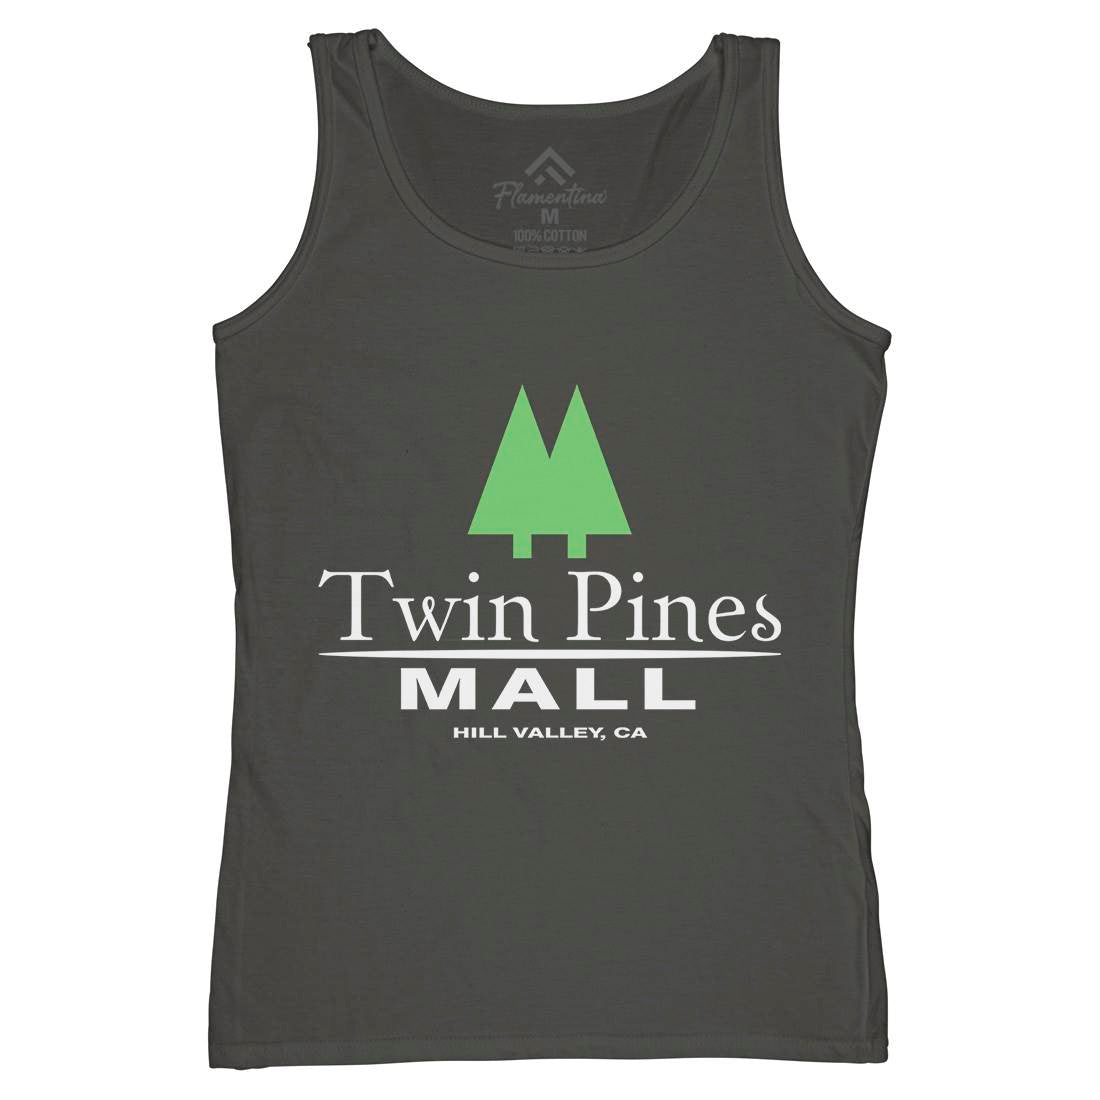 Twin Pines Mall Womens Organic Tank Top Vest Space D311